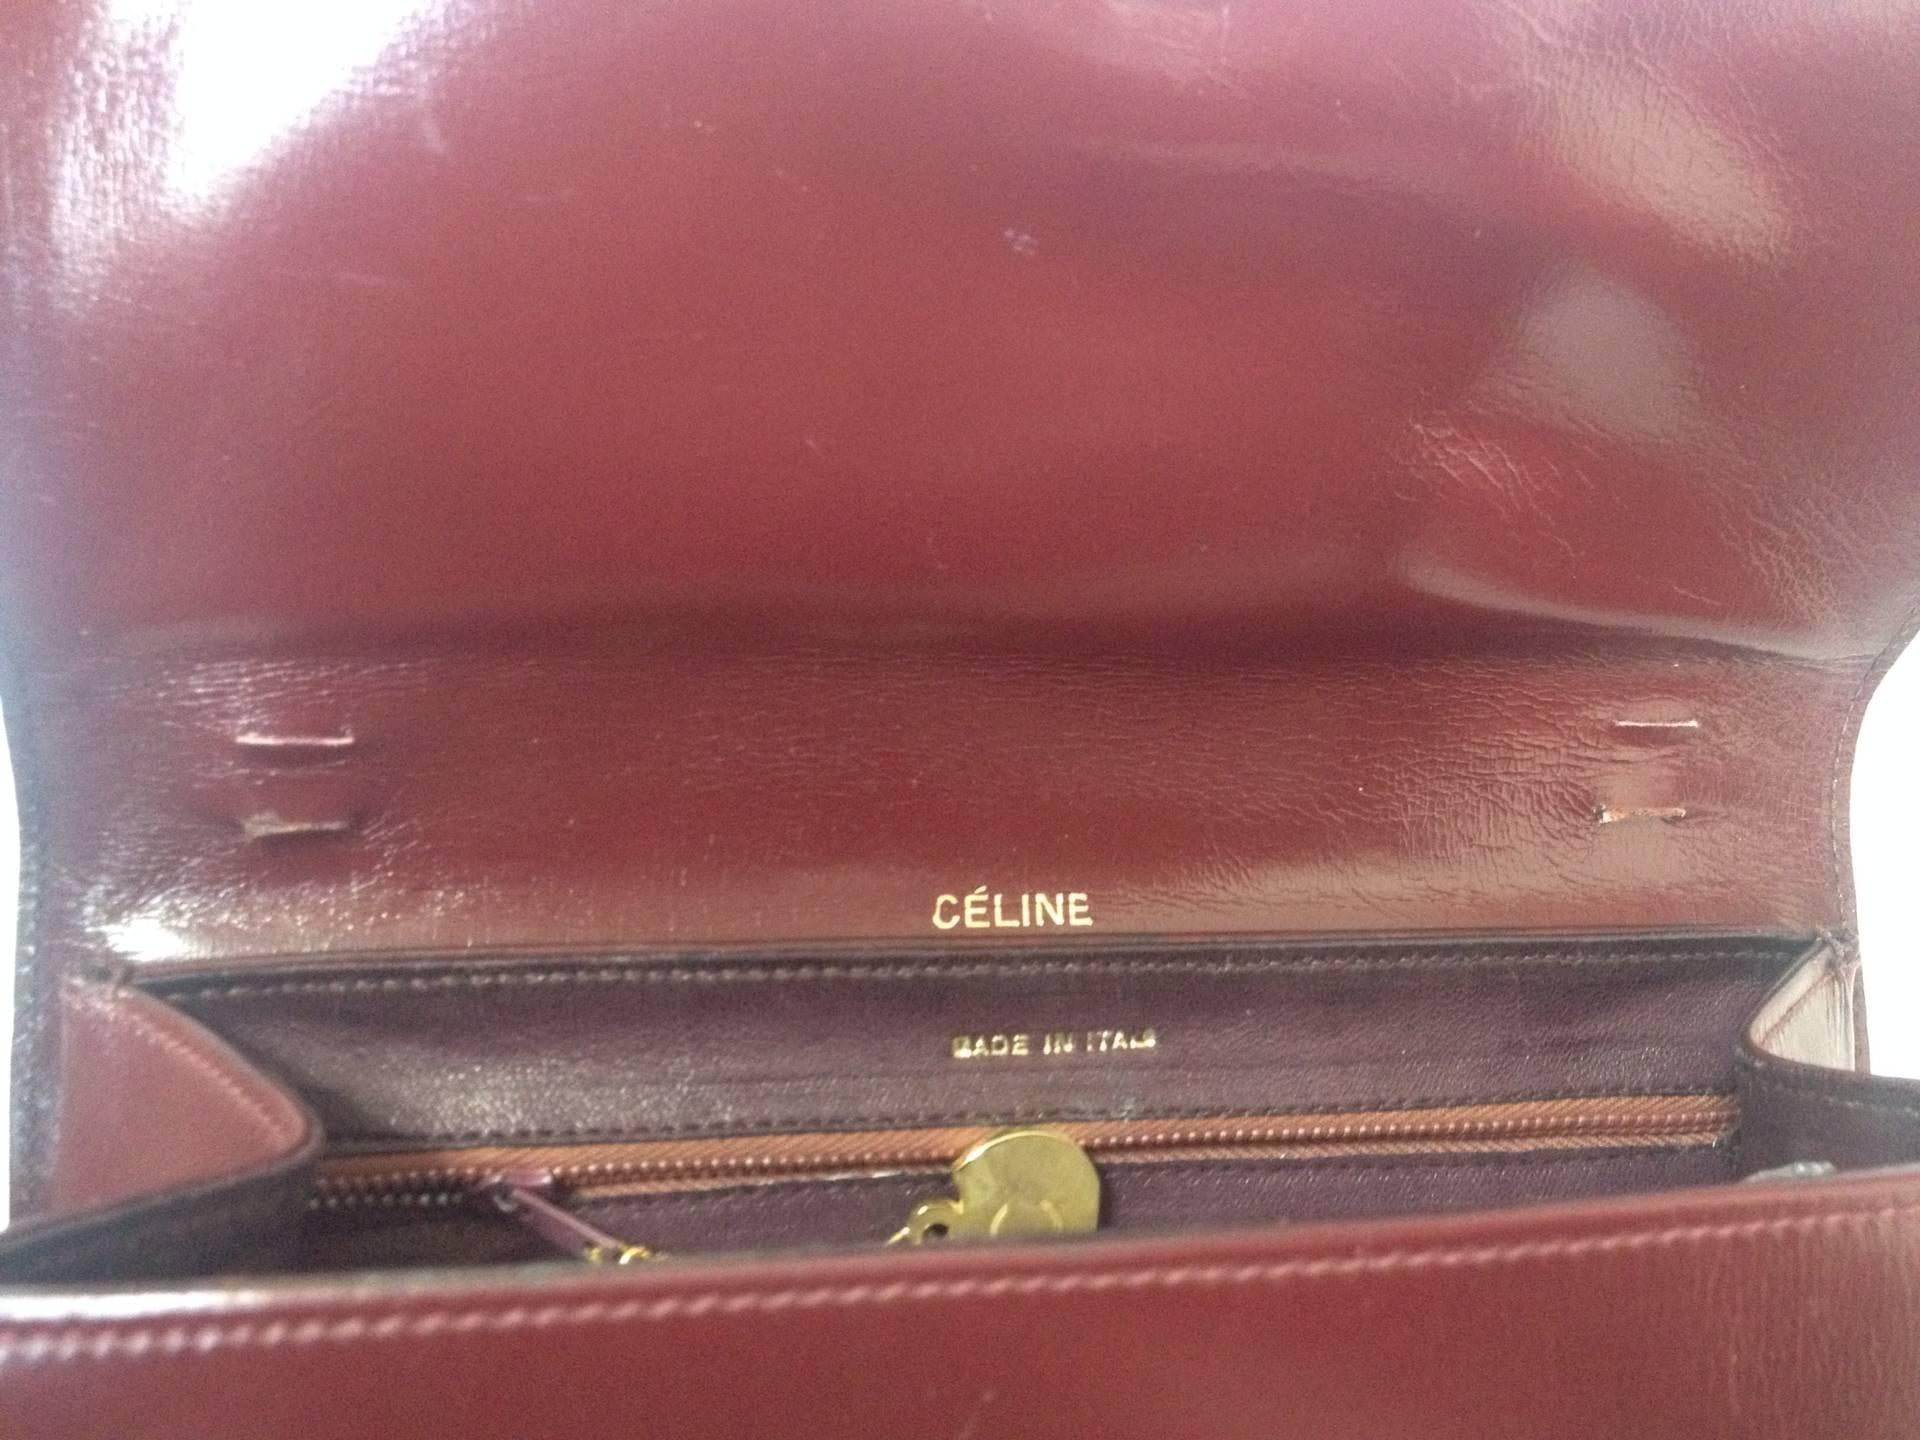 Women's or Men's intage CELINE genuine wine brown leather clutch bag with golden carriage logo.